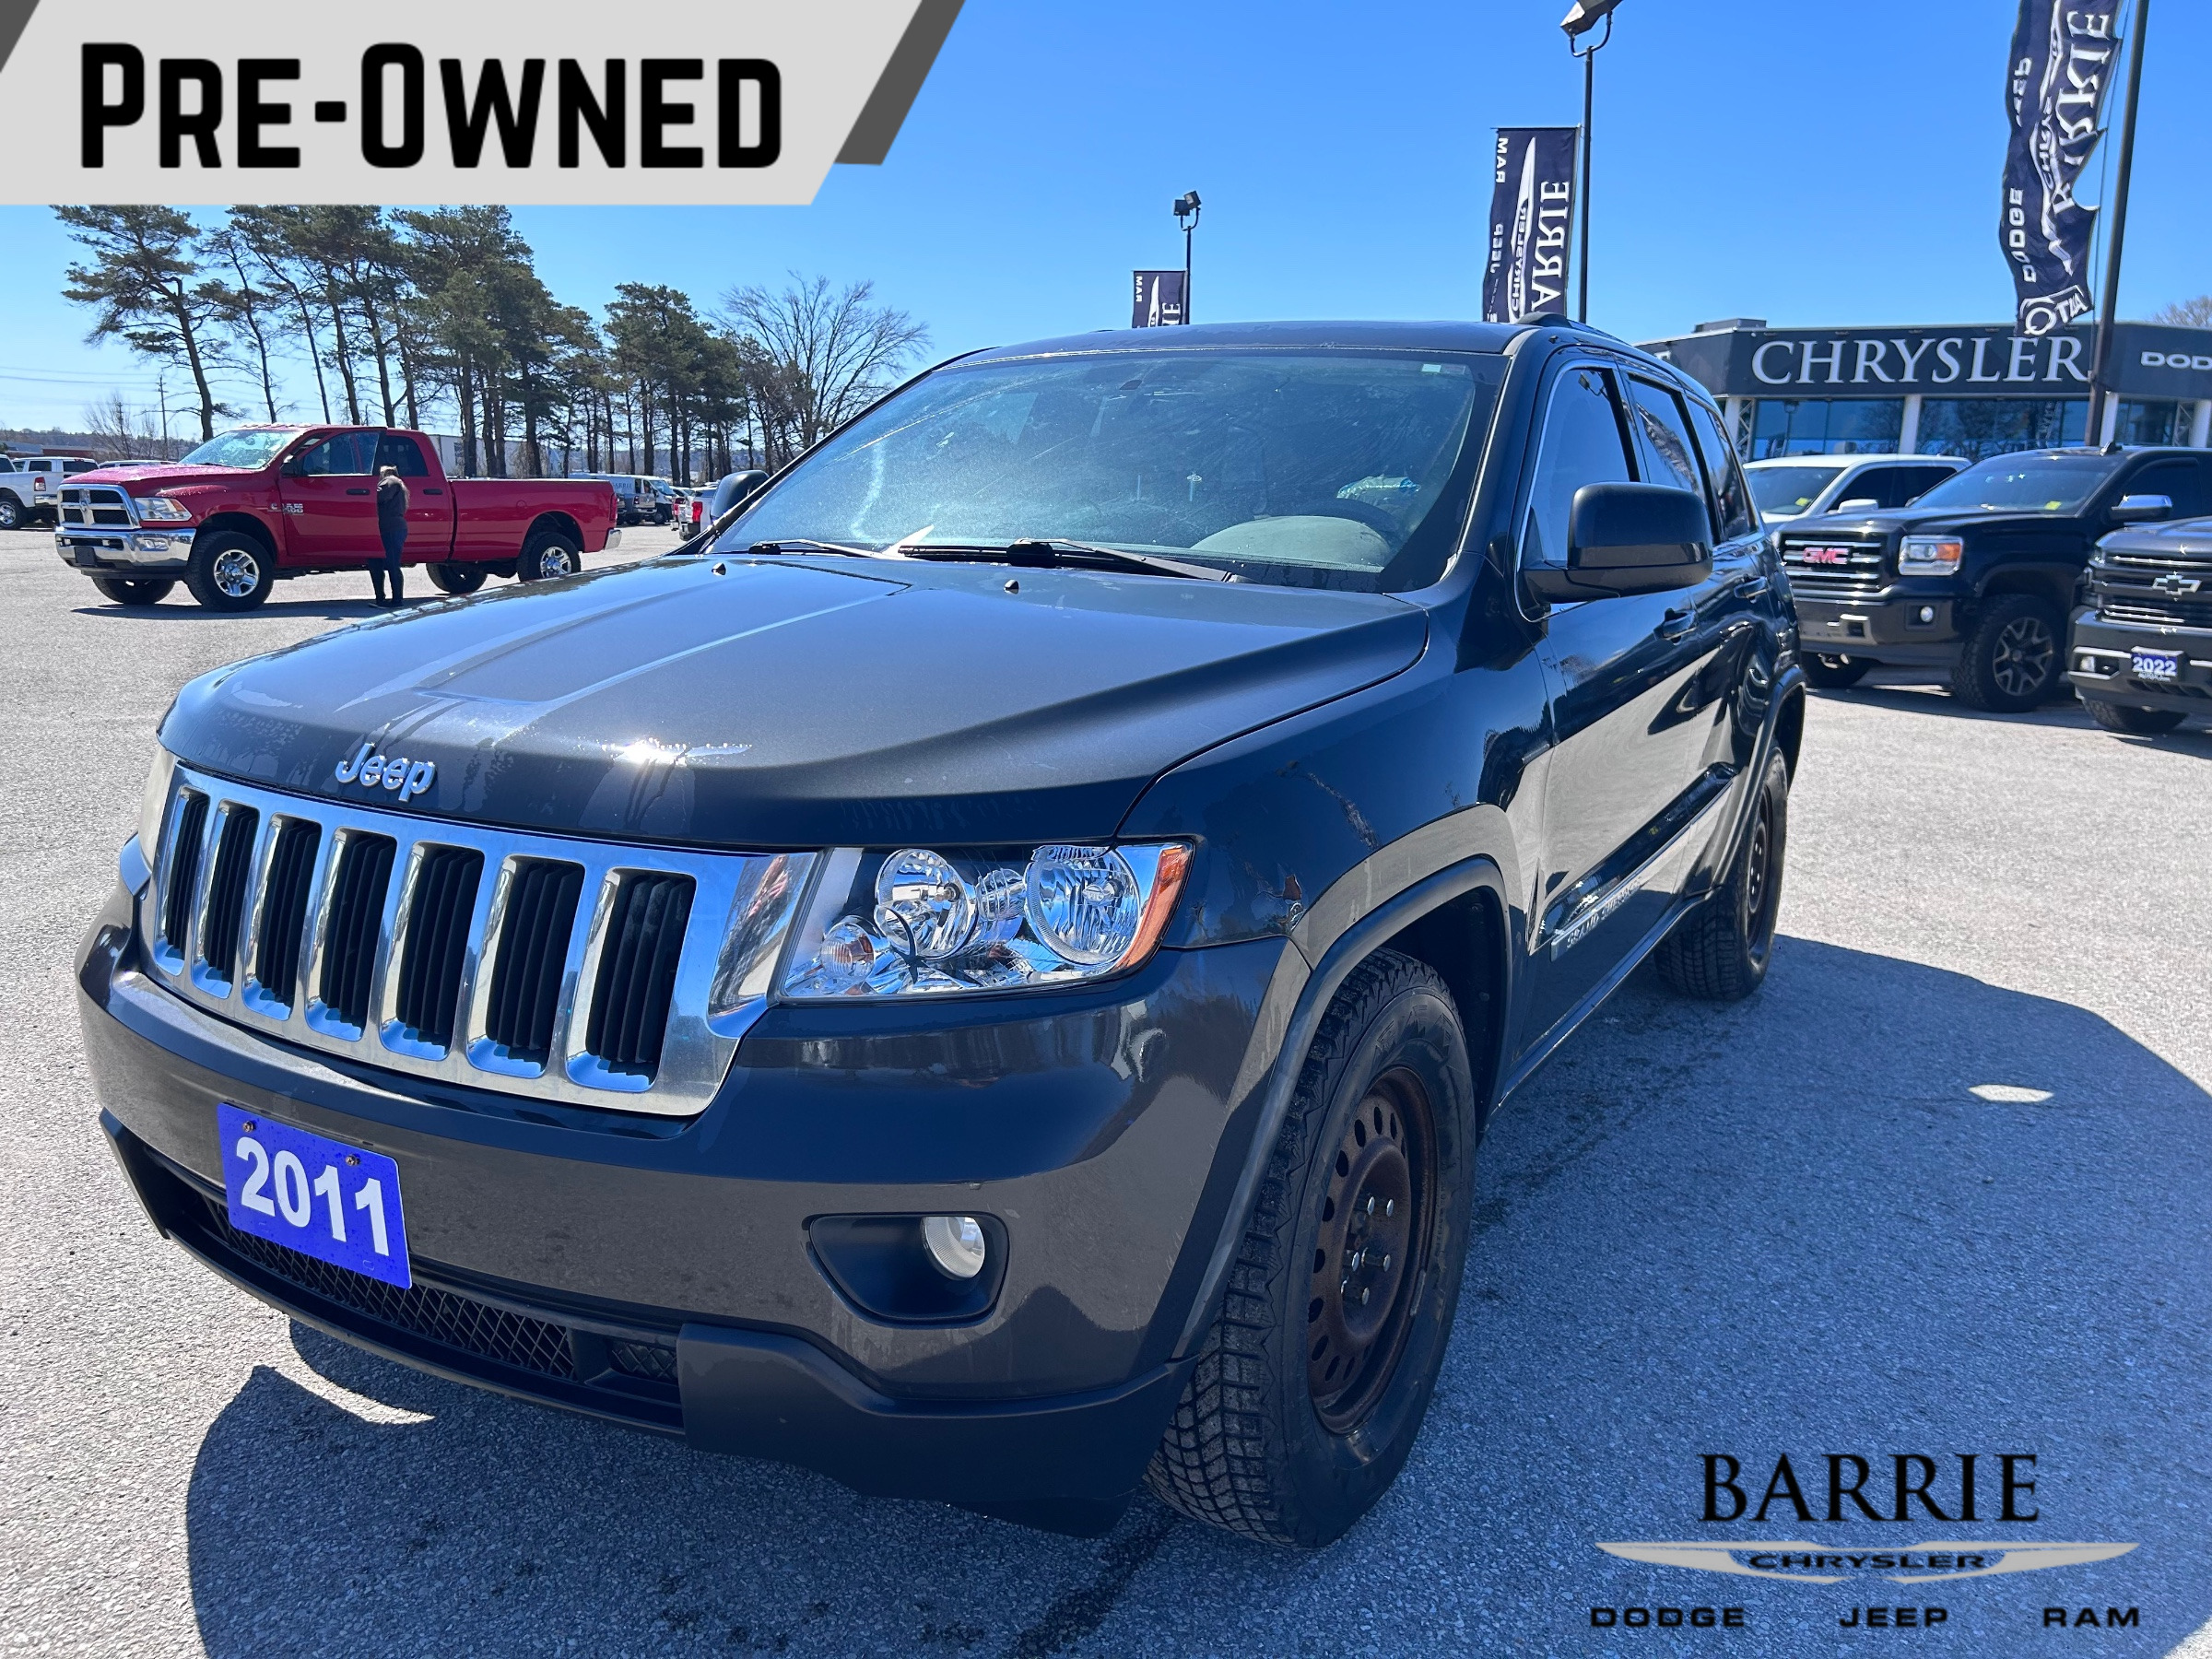 2011 Jeep Grand Cherokee Laredo SOLD AS IS